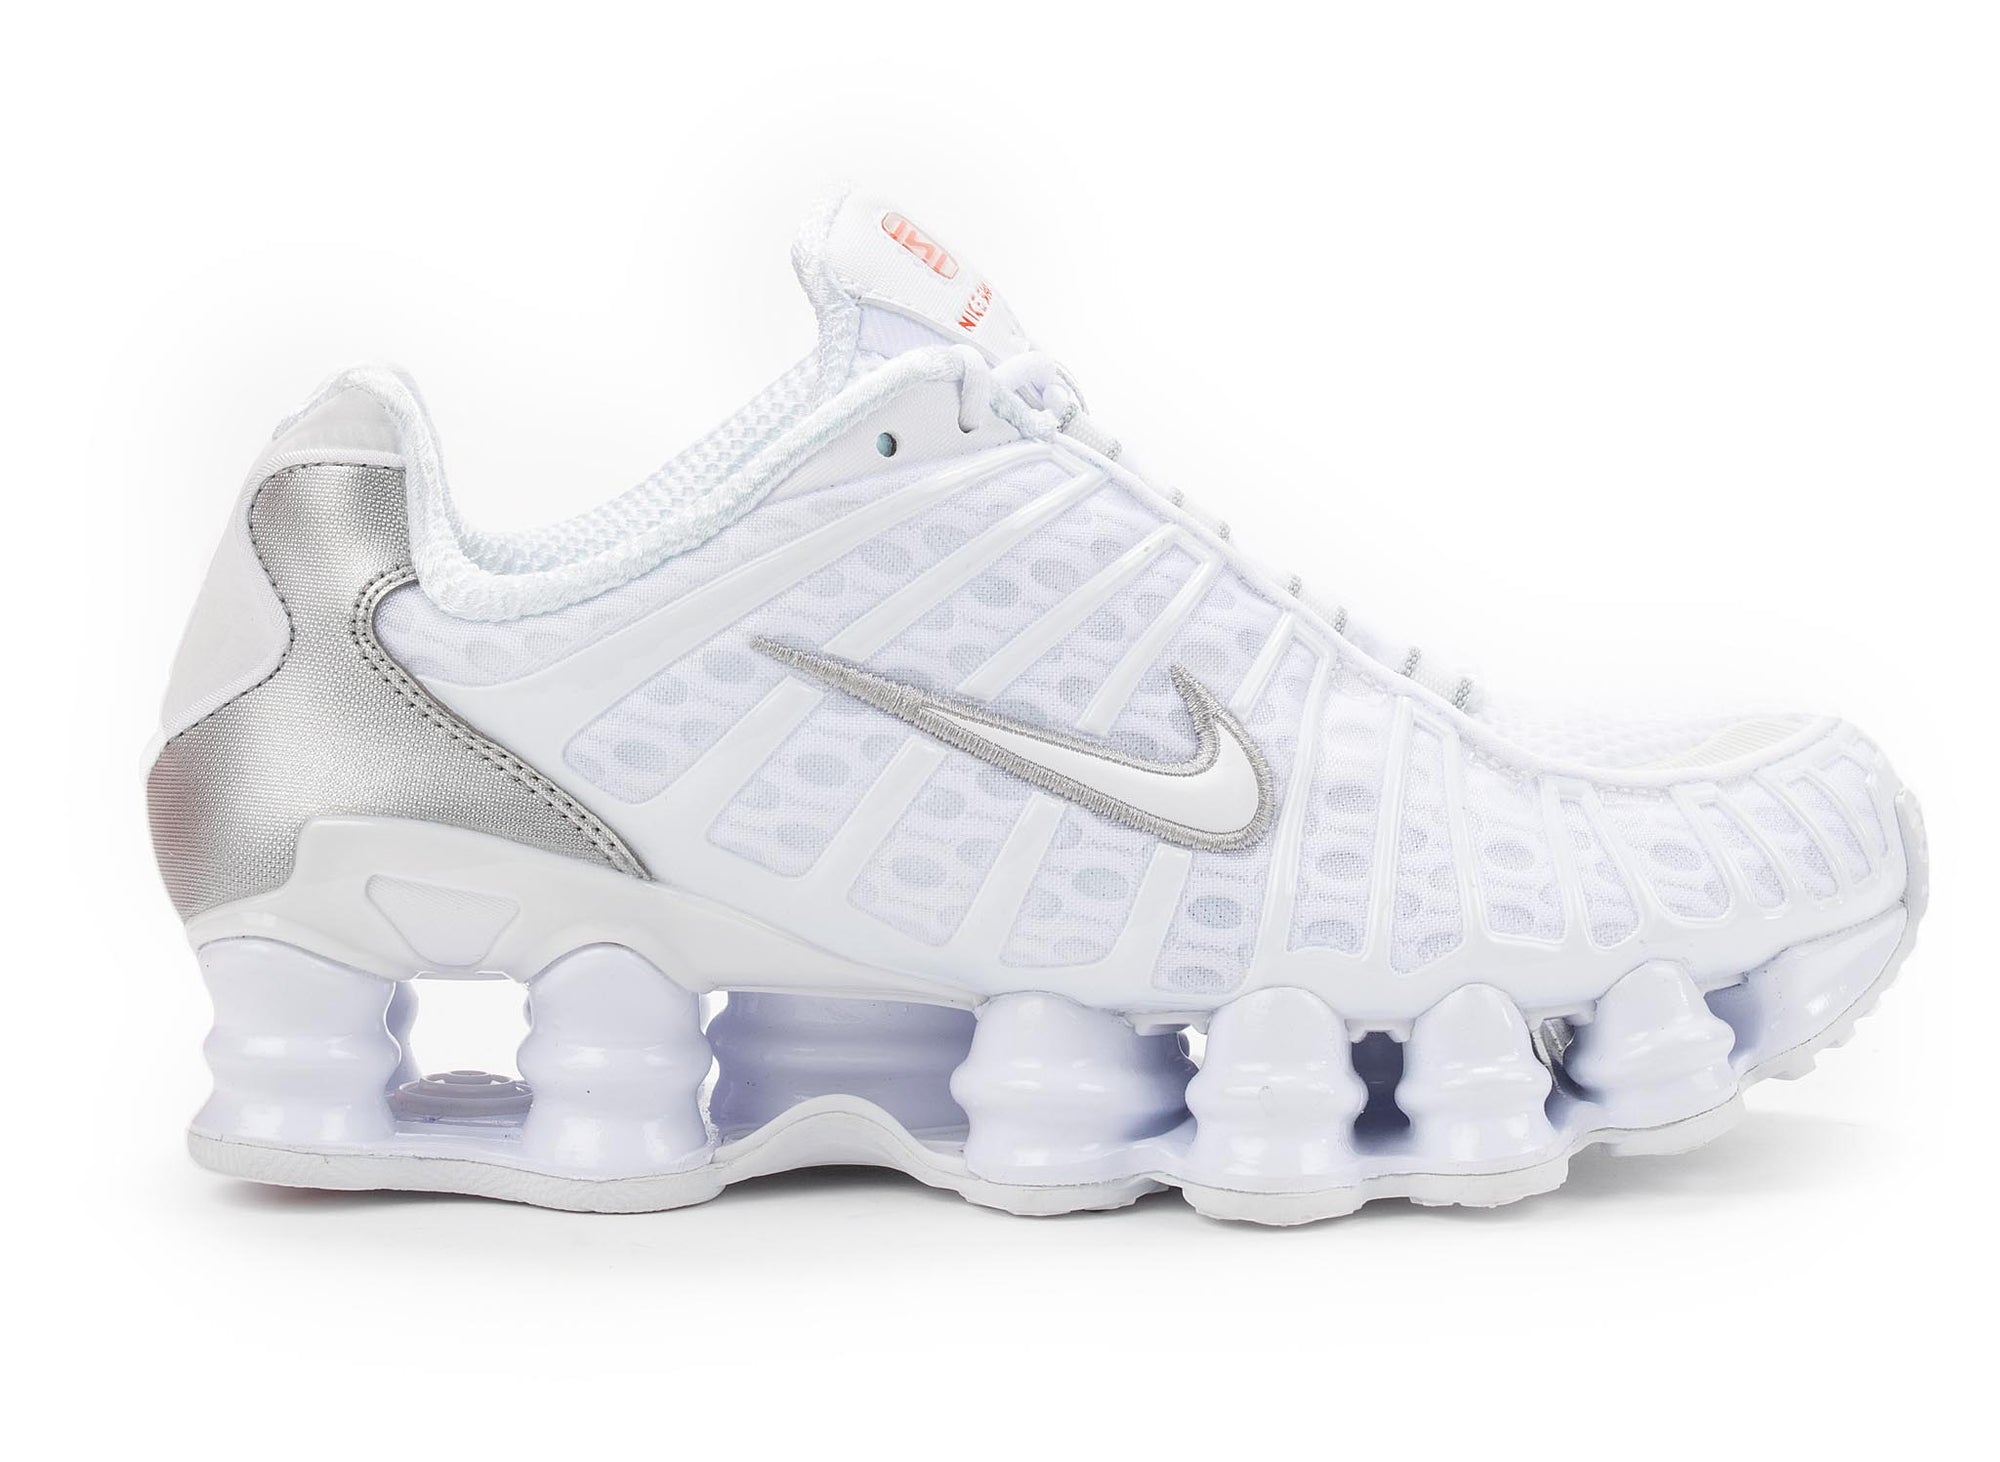 white and silver shox